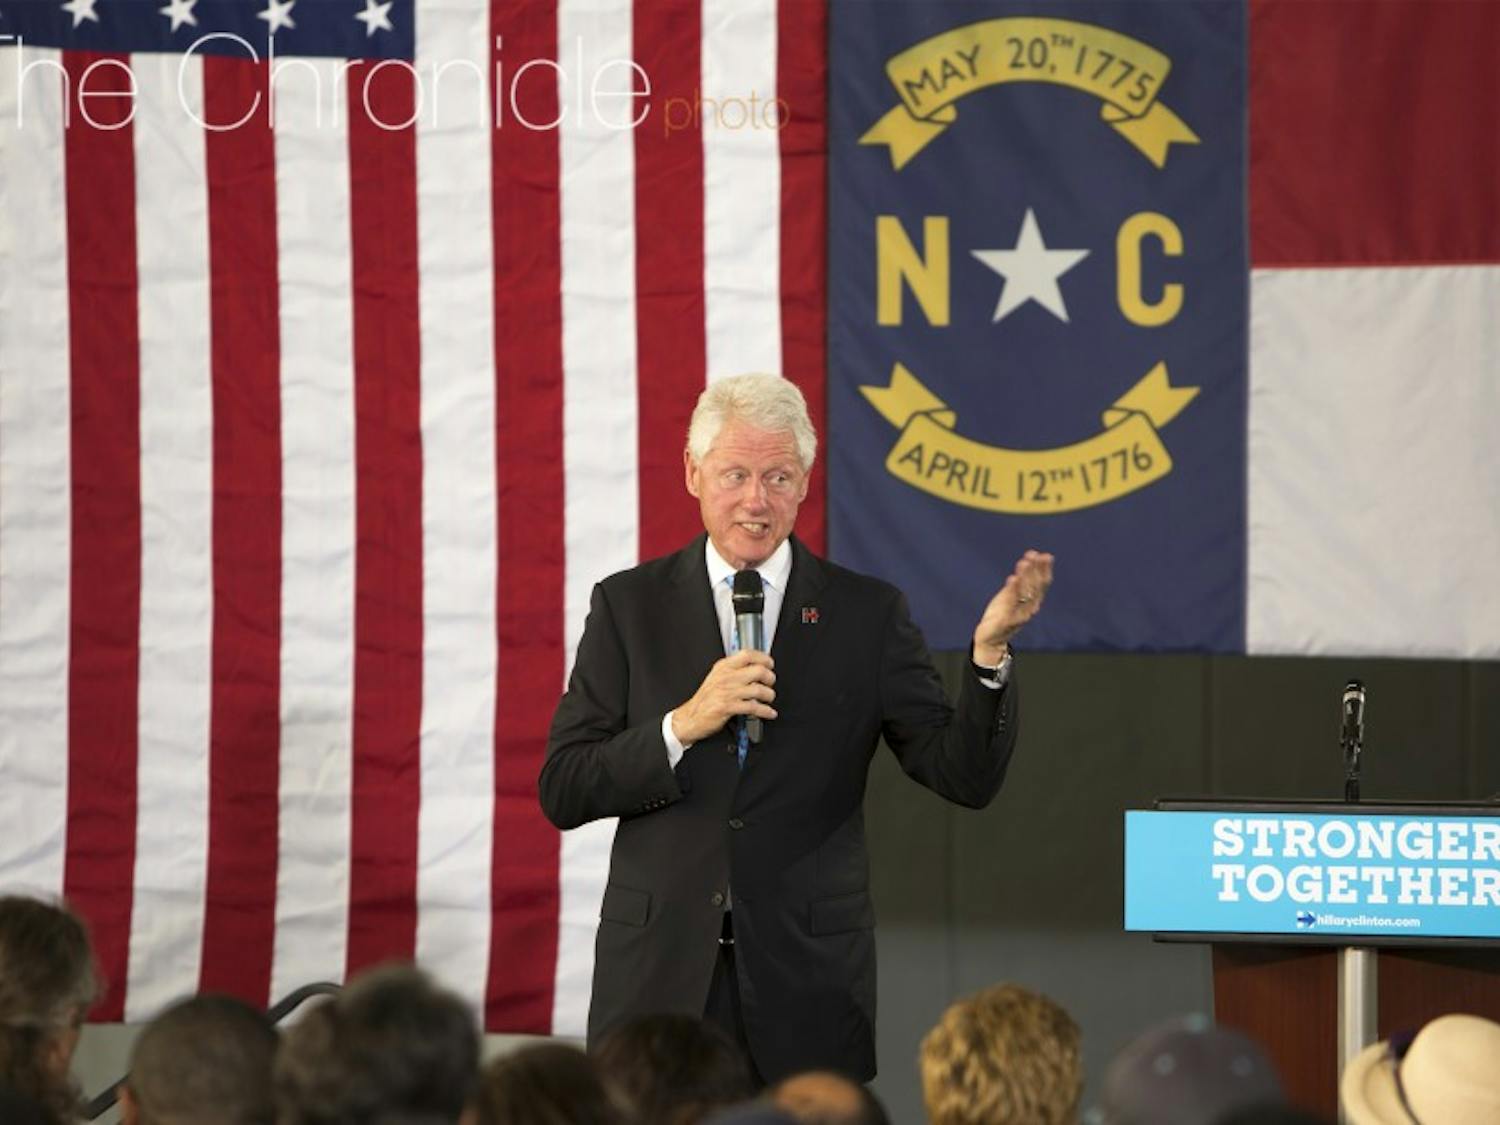 Bill Clinton visited Durham Tuesday to campaign for his wife, Democratic presidential nominee Hillary Clinton.&nbsp;